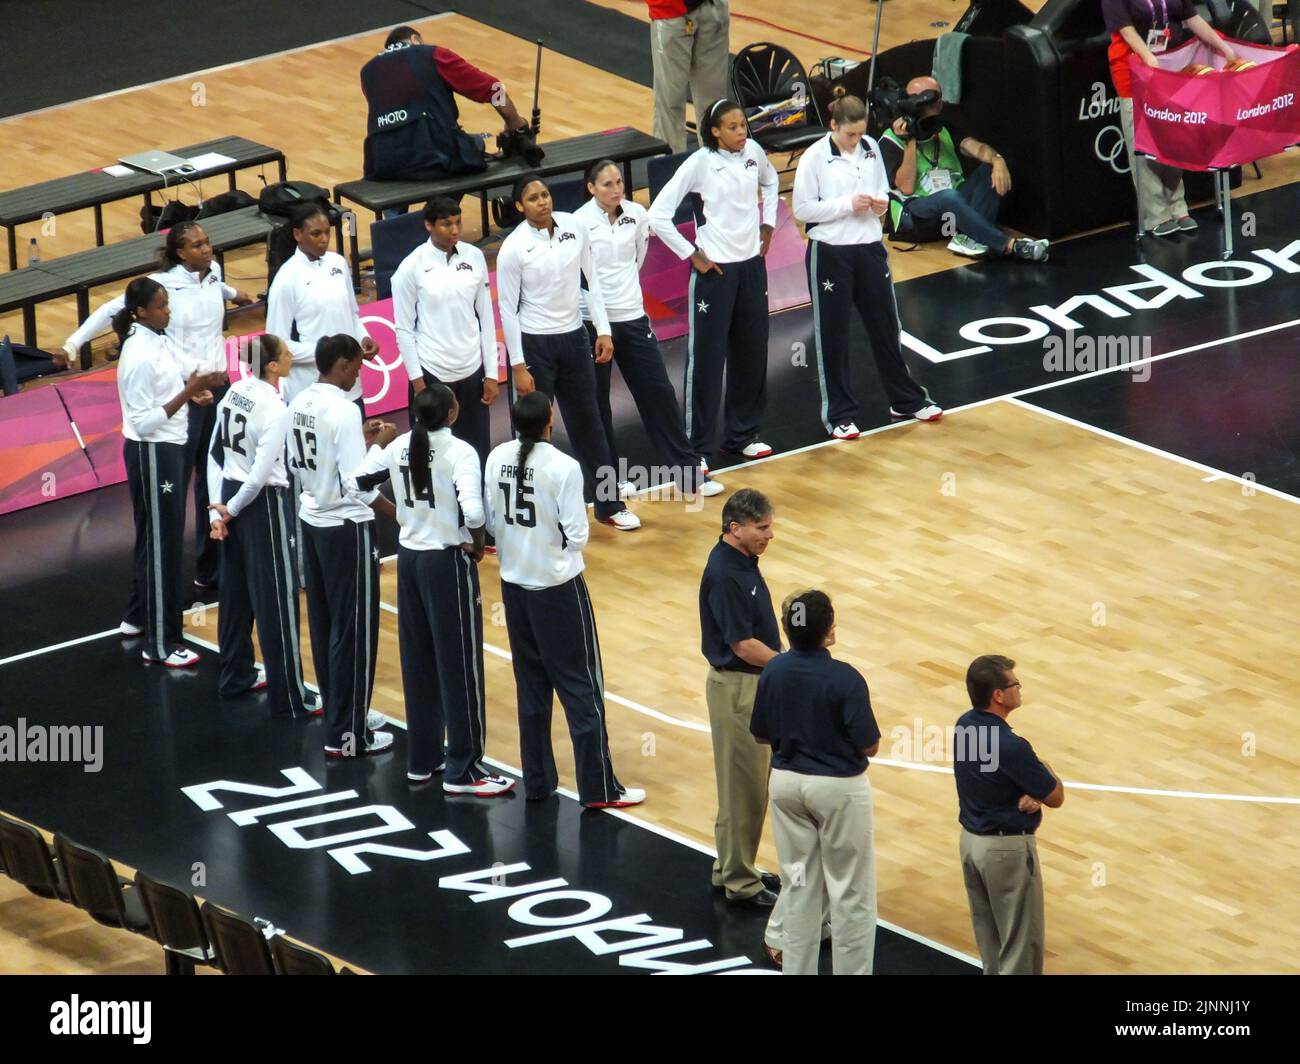 The United States Women's Olympic Basketball Team stands courtside prior to a game at the 2012 Summer Olympics in London, England, UK. Stock Photo